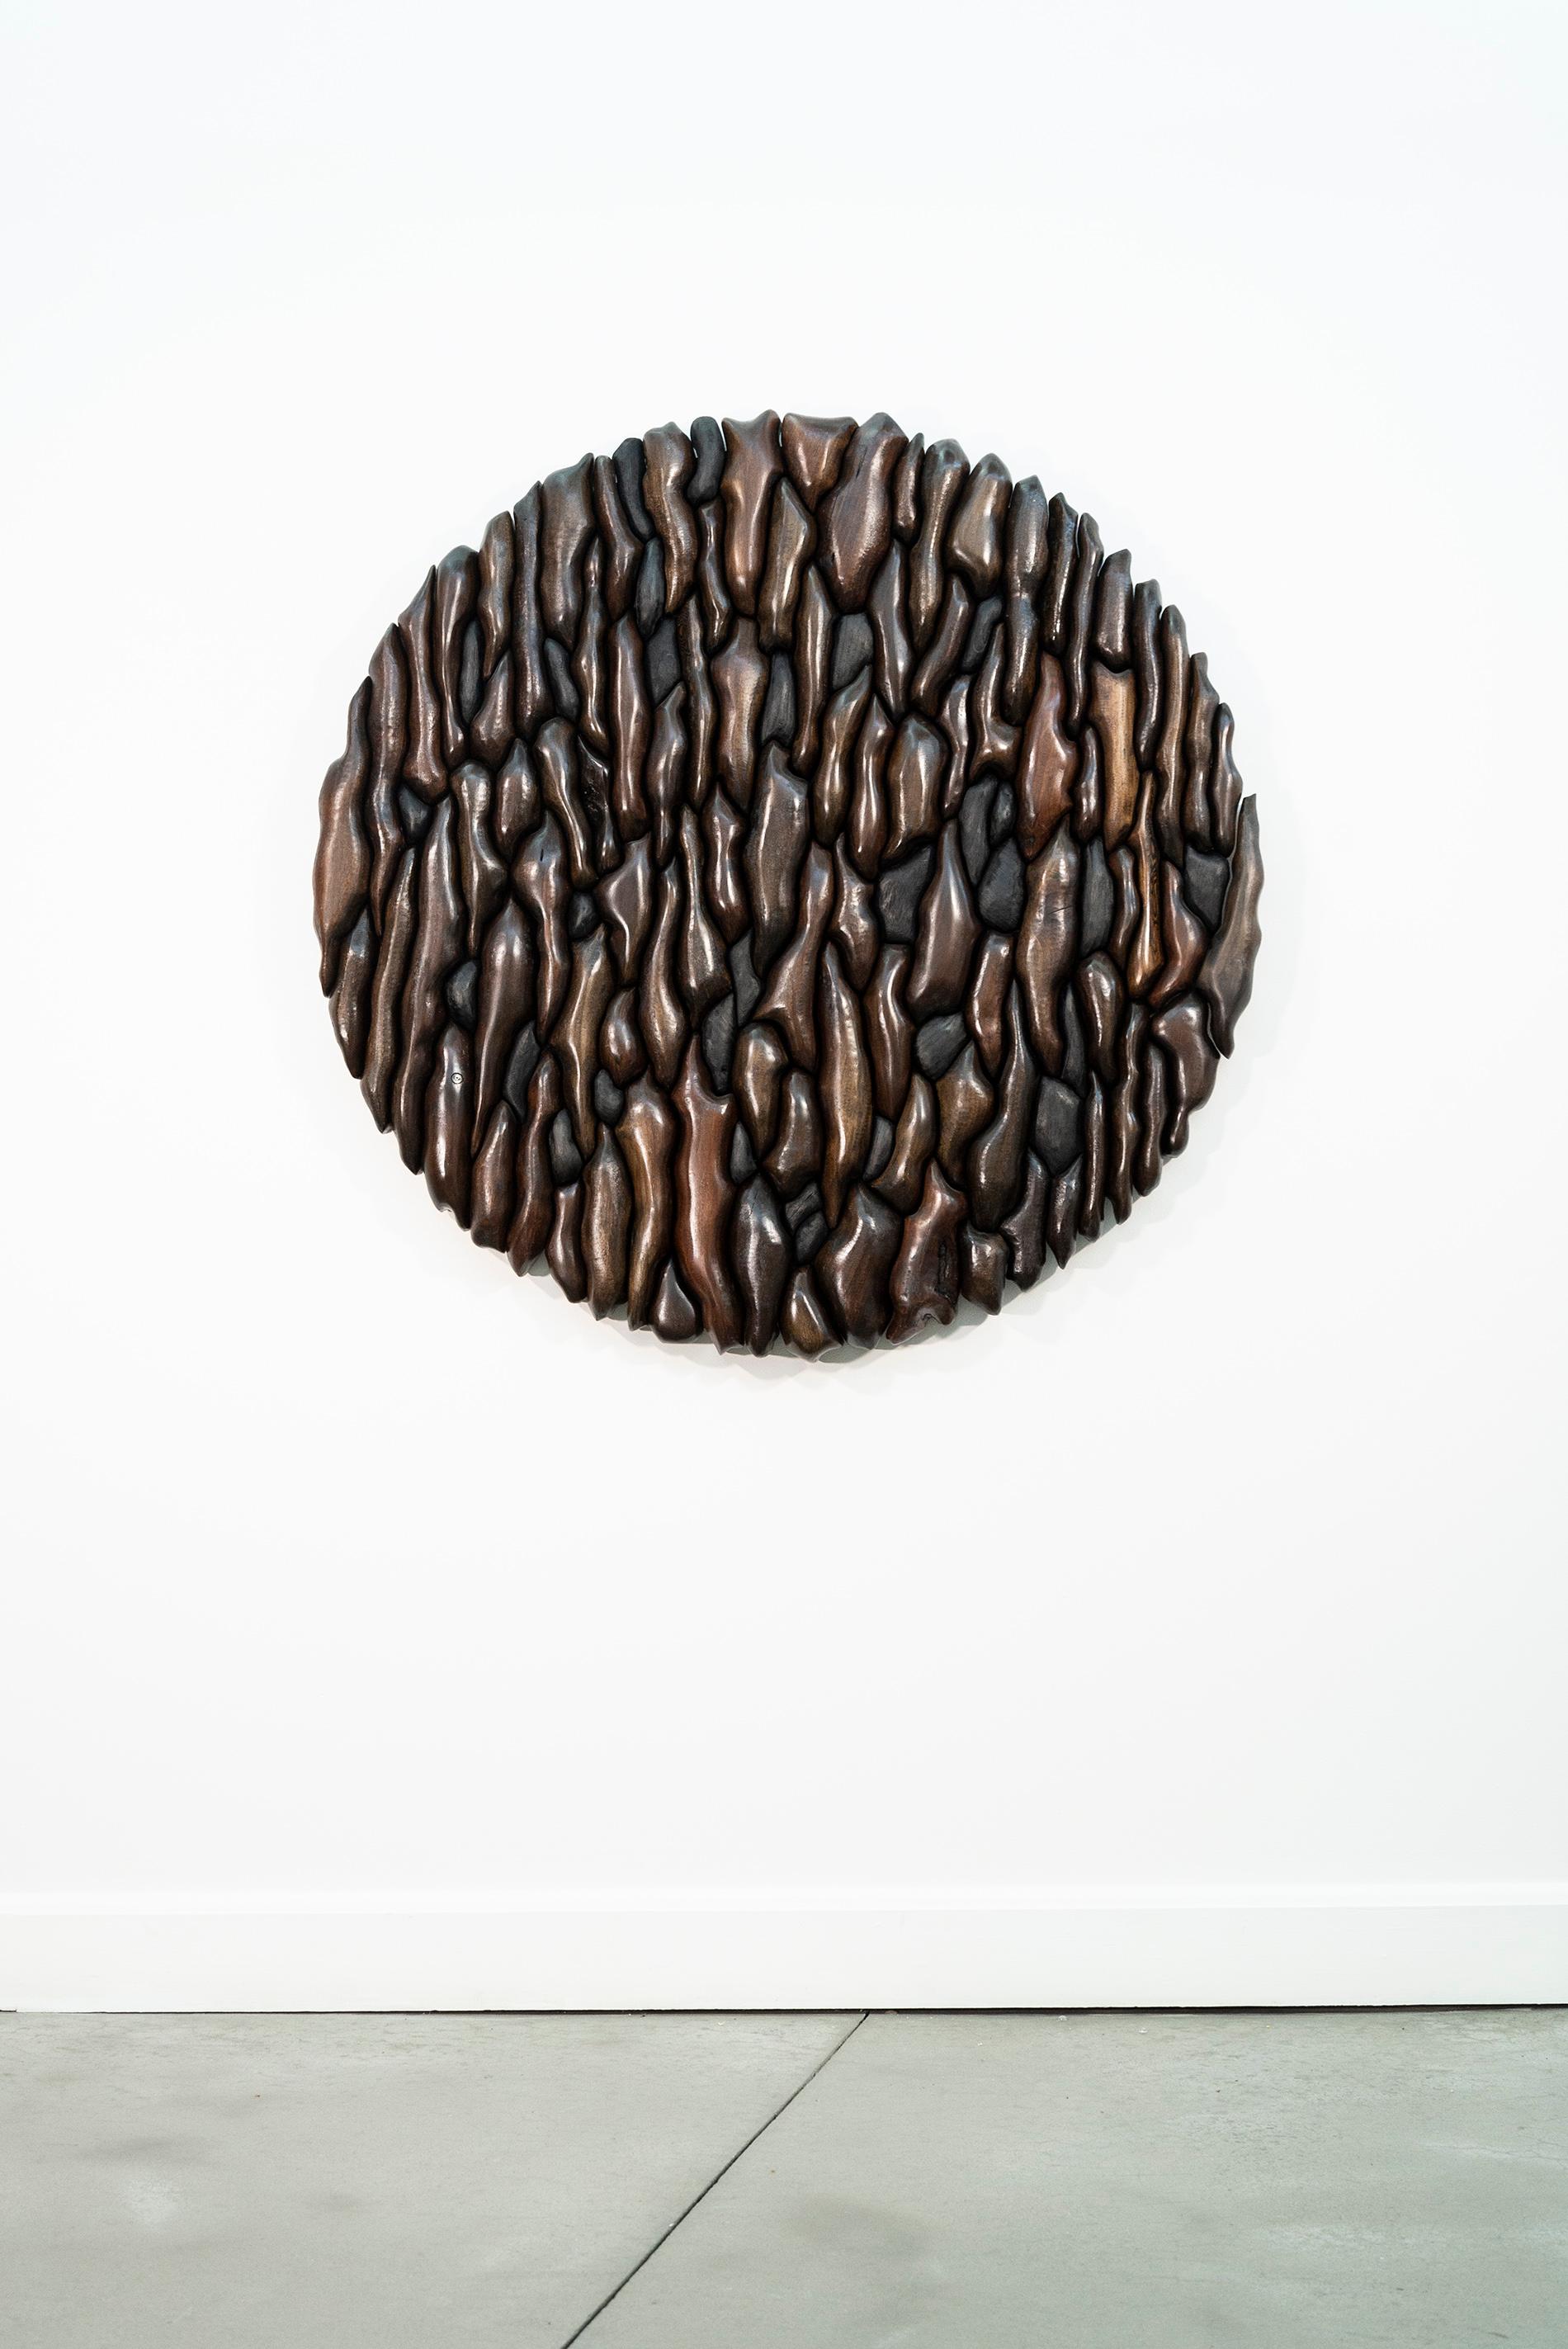 Roots and Ashes - modern, contemporary, ash, walnut, stained wood wall sculpture - Contemporary Sculpture by Rod Mireau